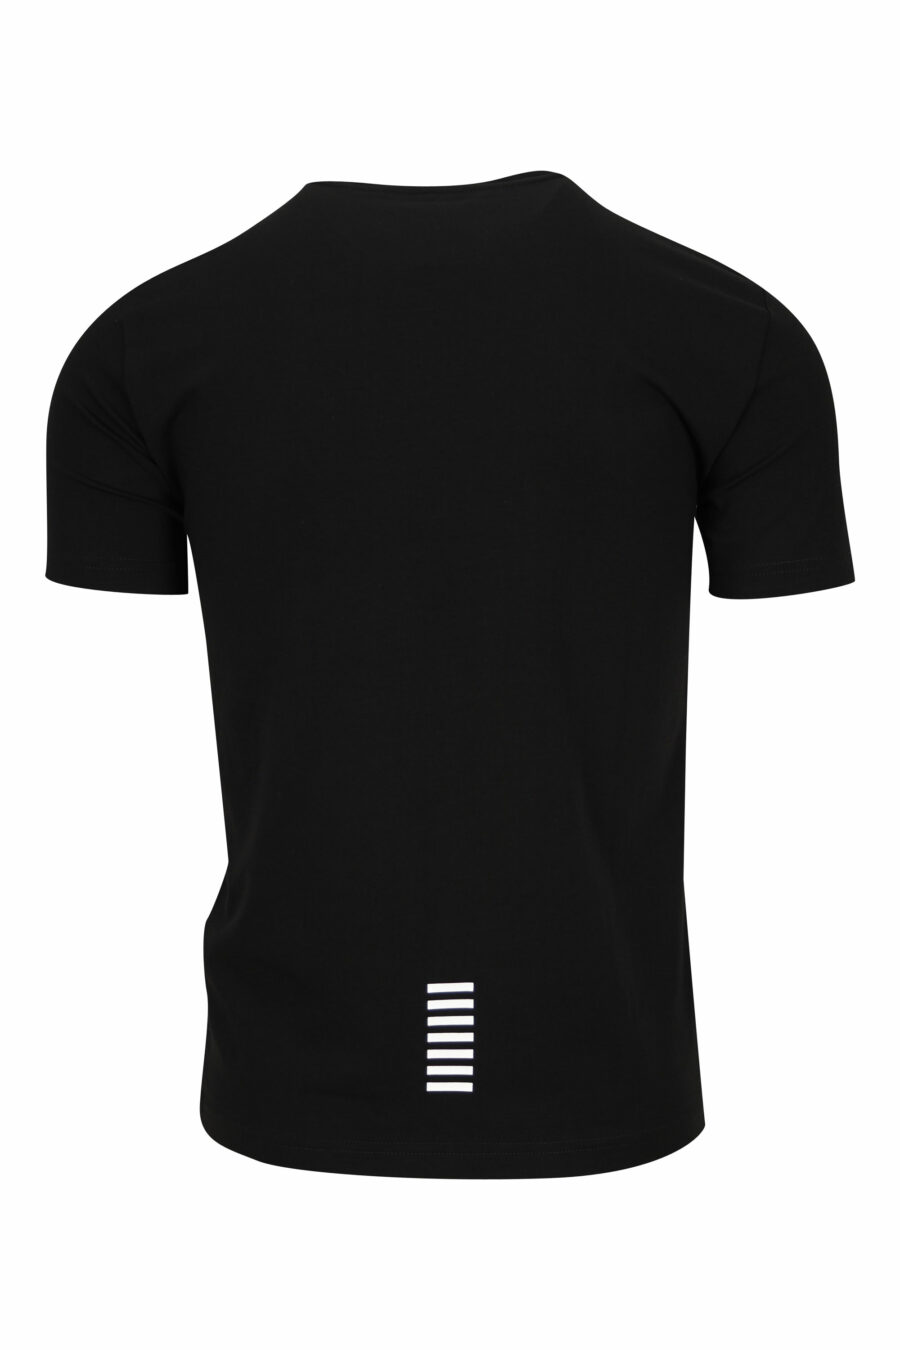 Black T-shirt with rubber "lux identity" minilogue - 8055187168106 1